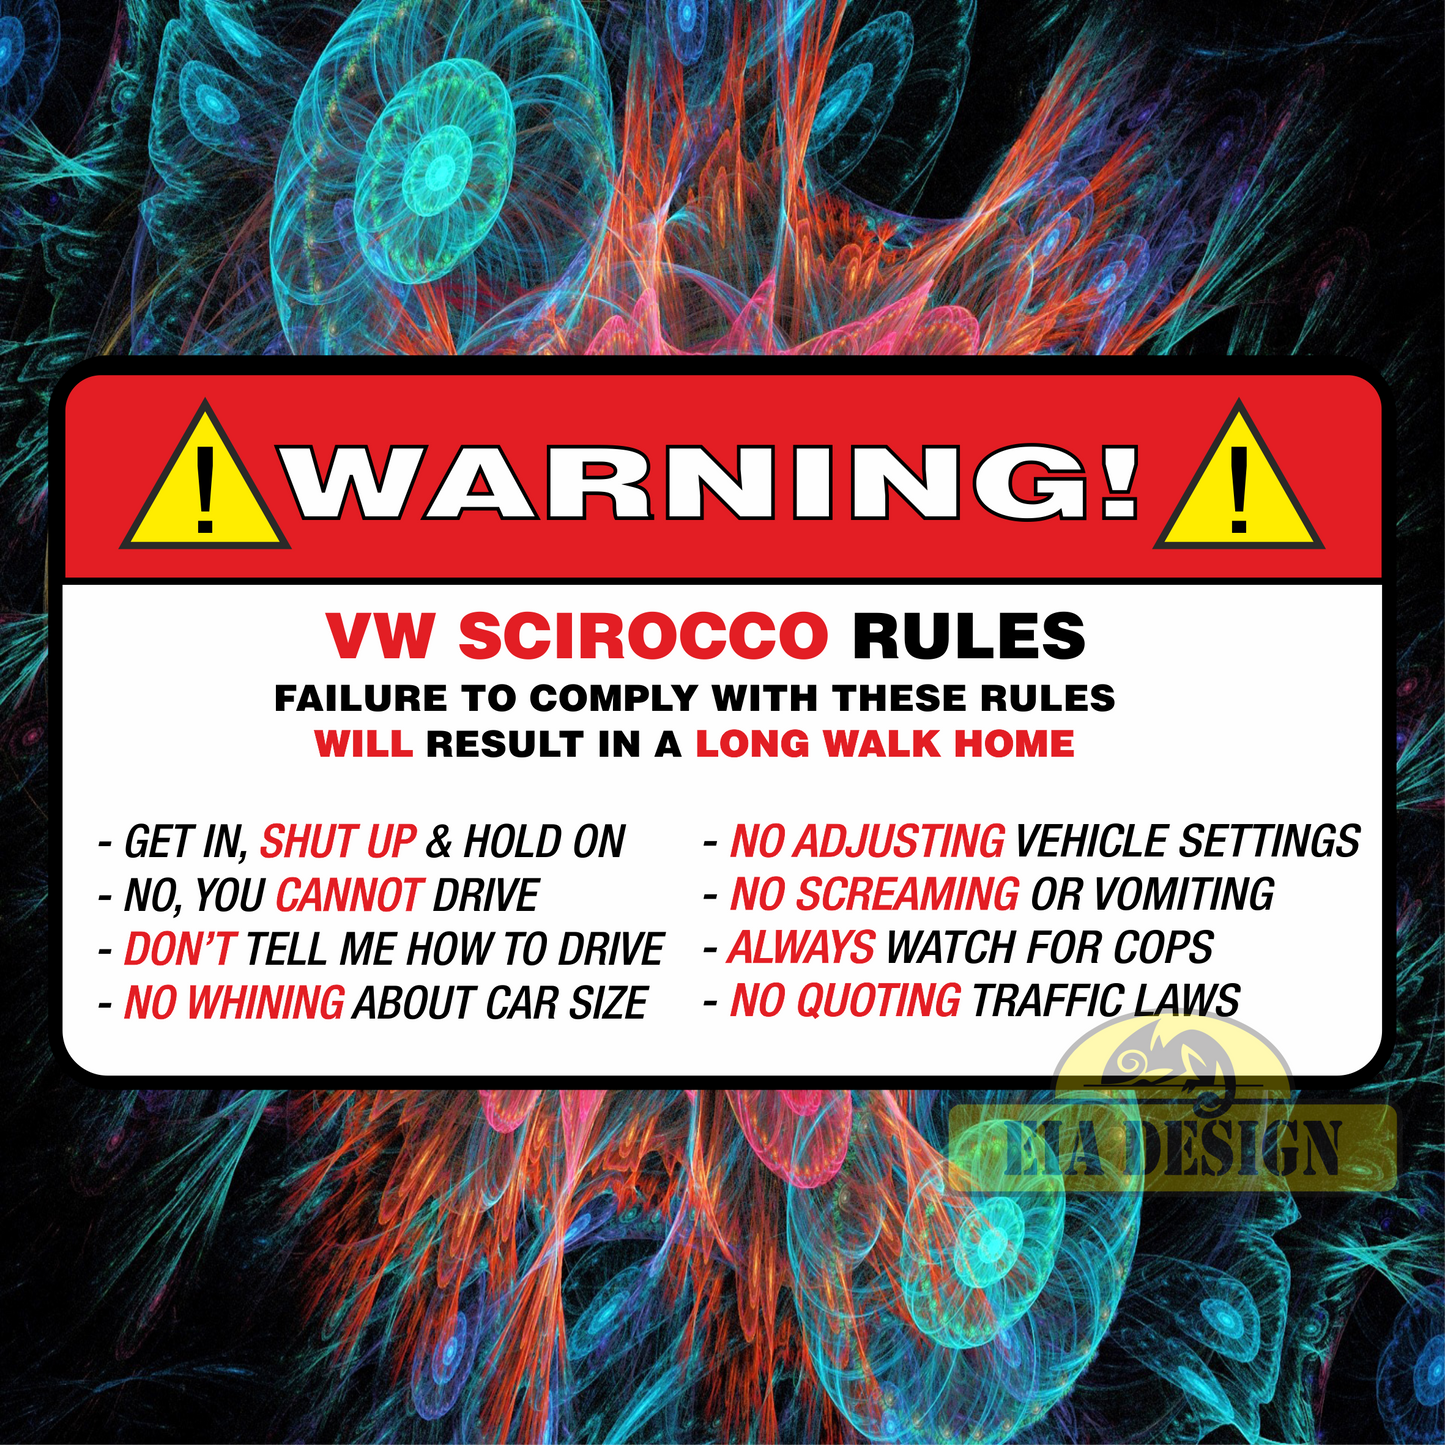 OFF ROAD FUNNY WARNING STICKERS - WARNING VW SIROCCO  RULES